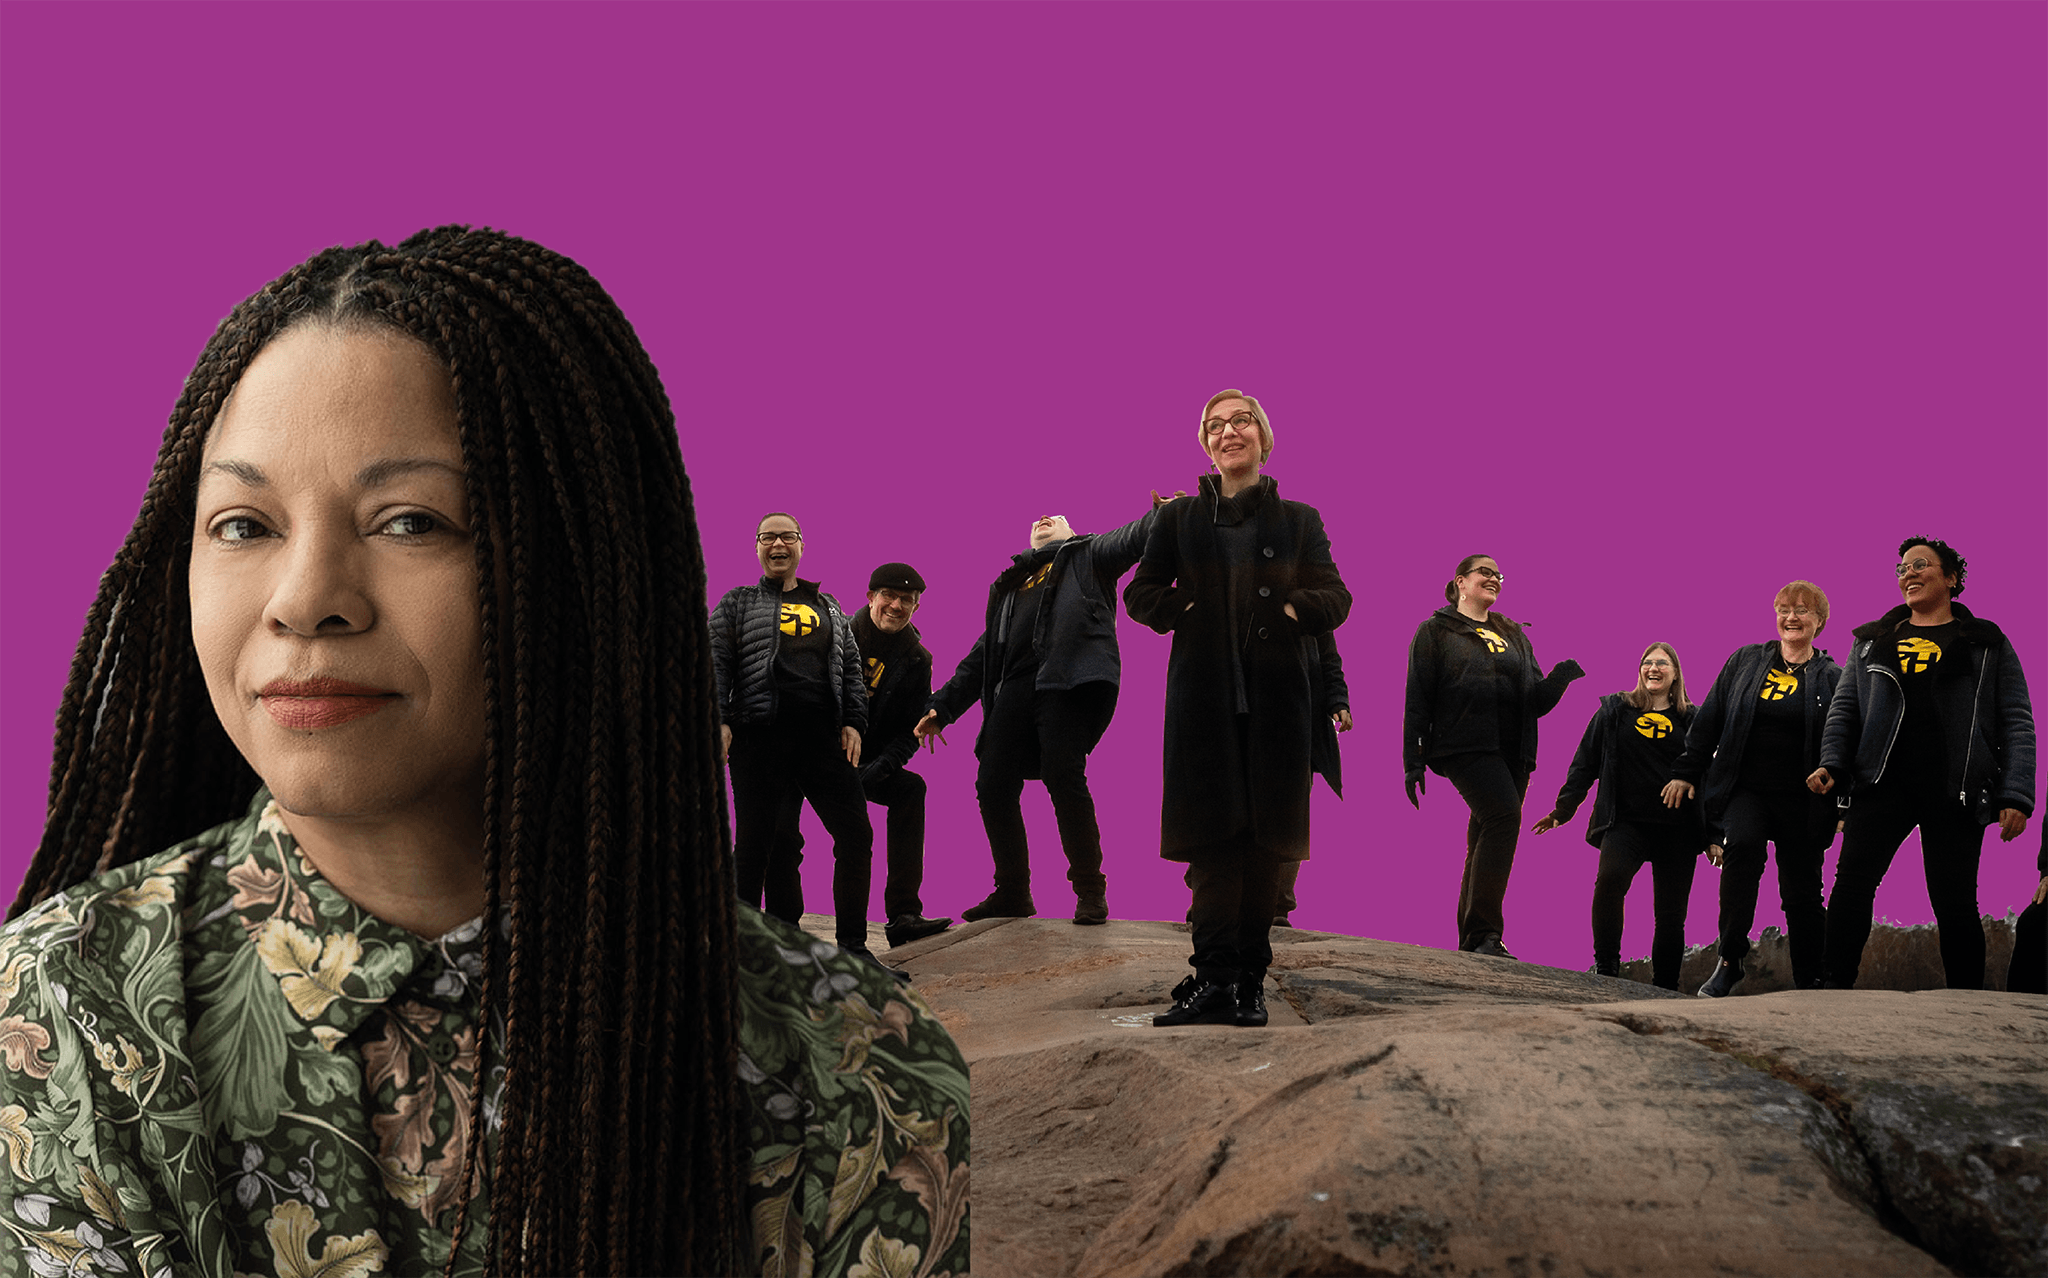 A collage of Nicole Willis and the Gospel Helsinki choir.